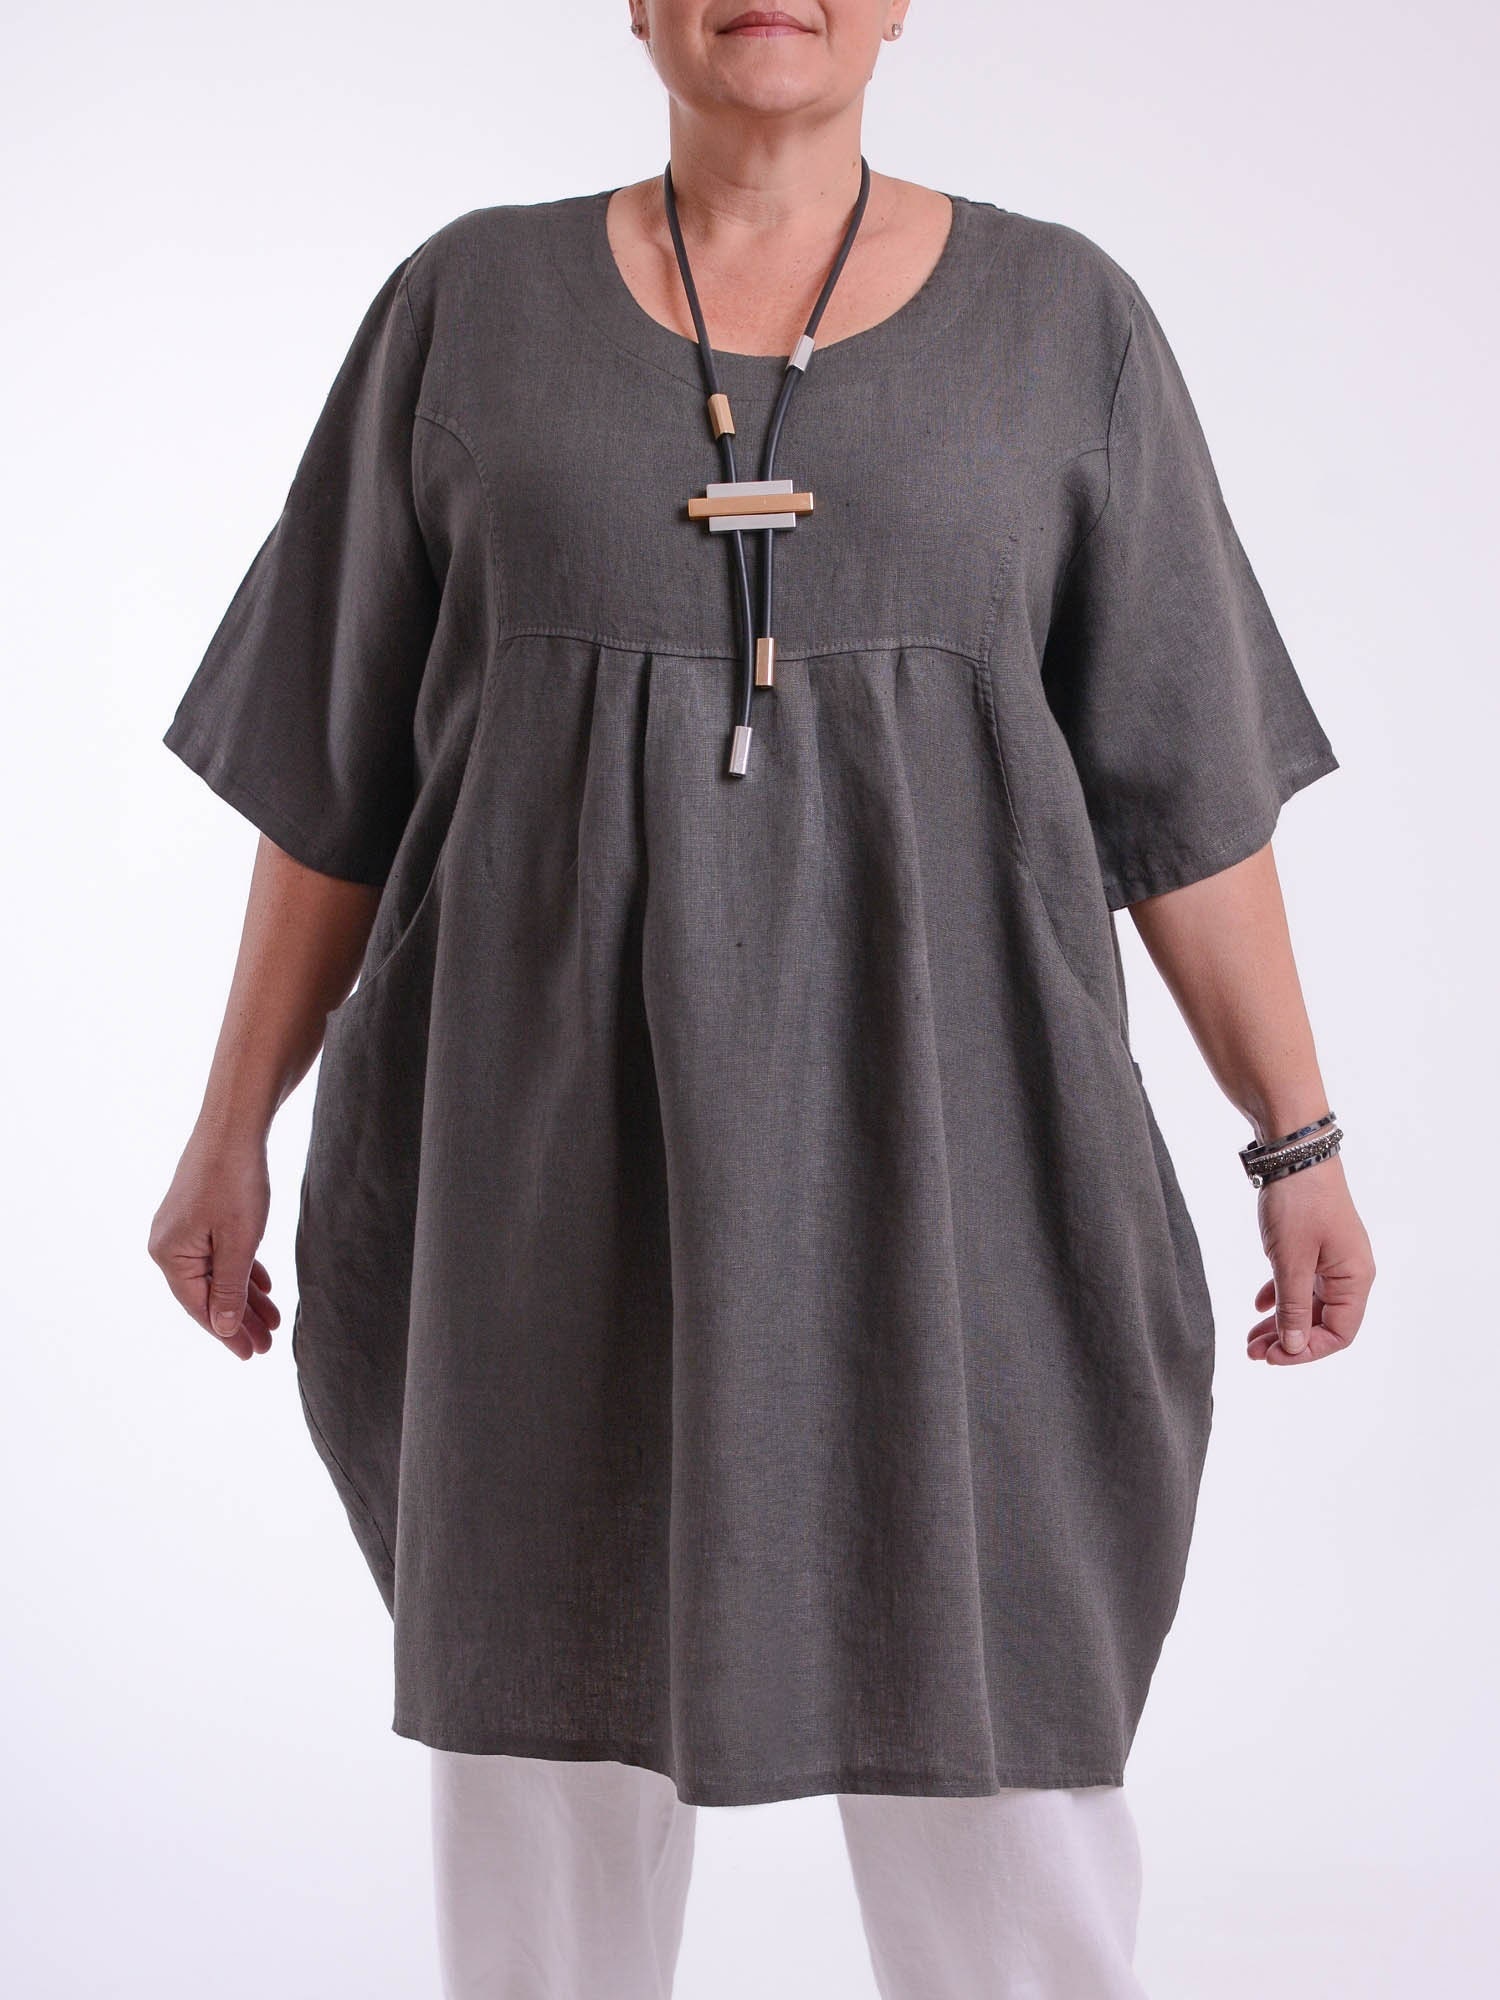 Linen Tunic Dress With Short Sleeves, Linen Tunic for Women, Plus Size Tunic,  Tunic Tops, Linen Tunics for Women, Tunic Shirt, Women's Tunic 